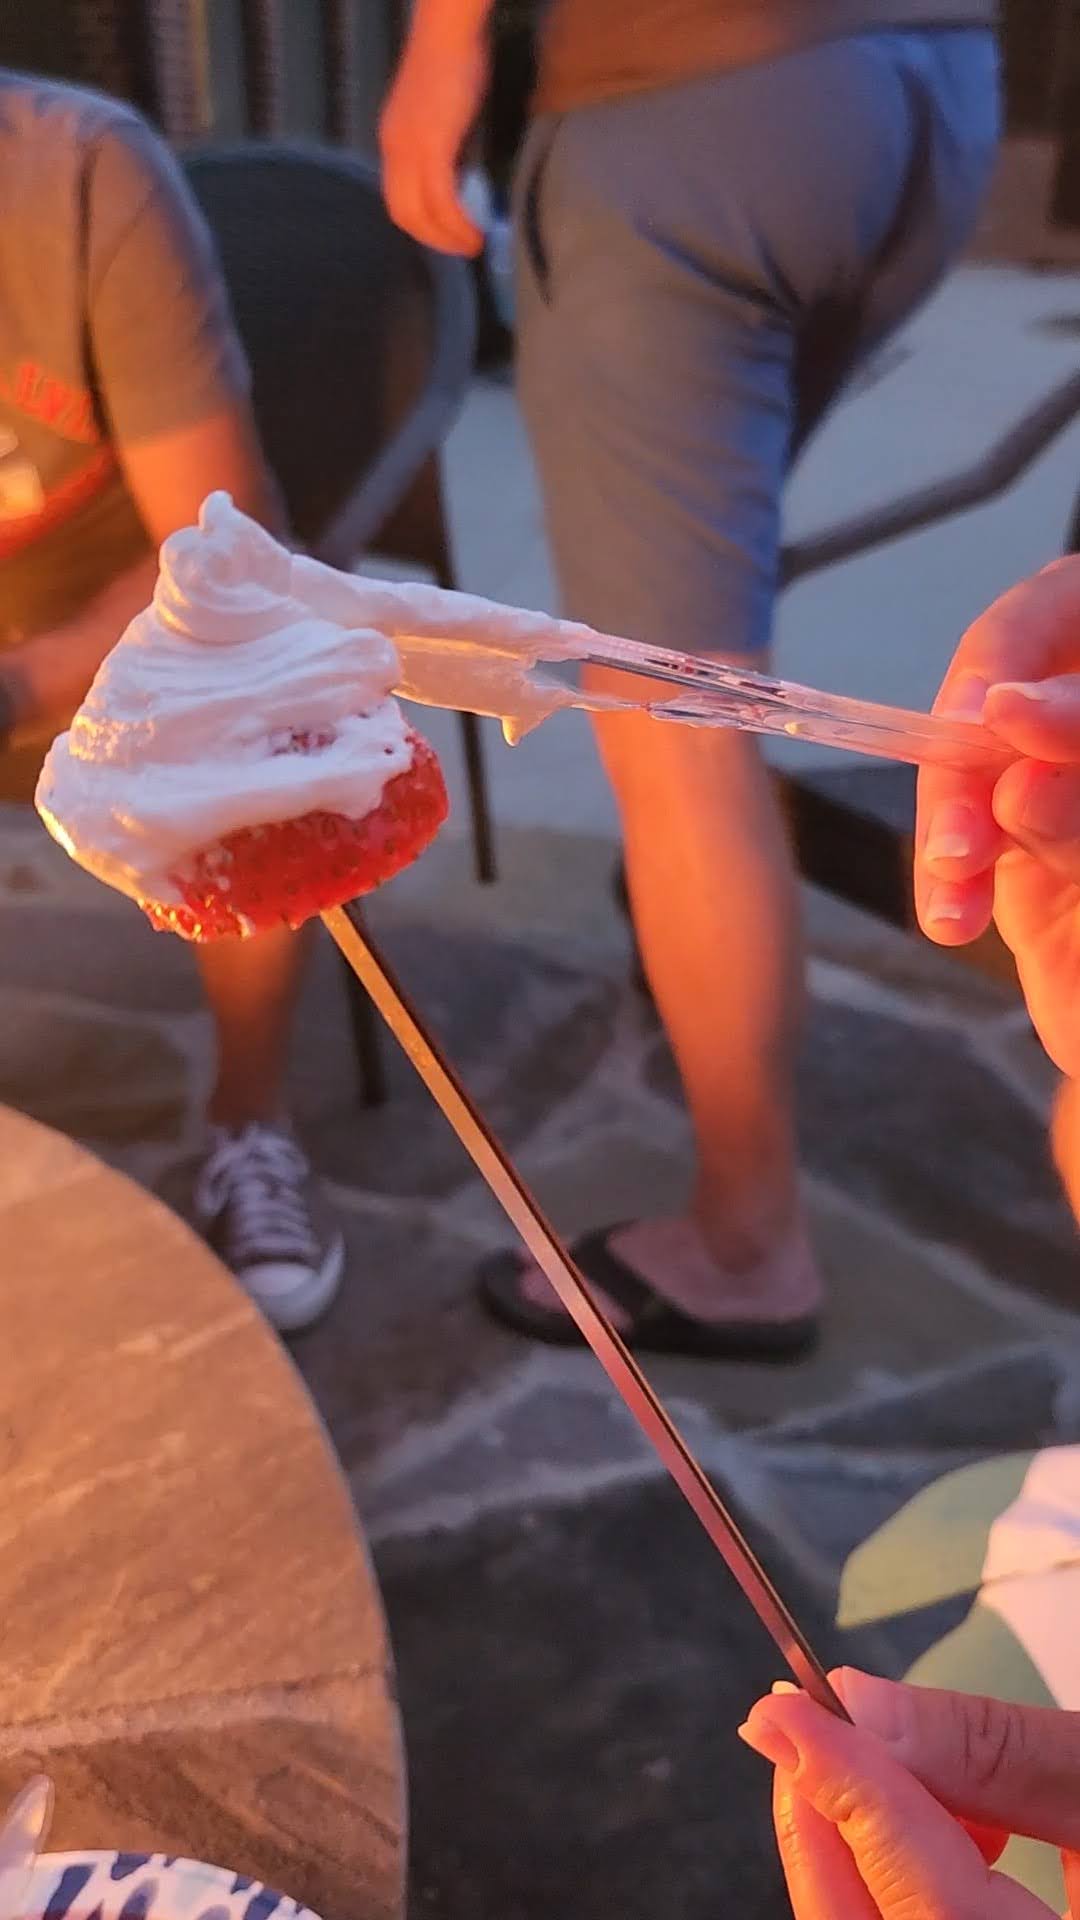 strawberry on a skewer with marshmallow fluff